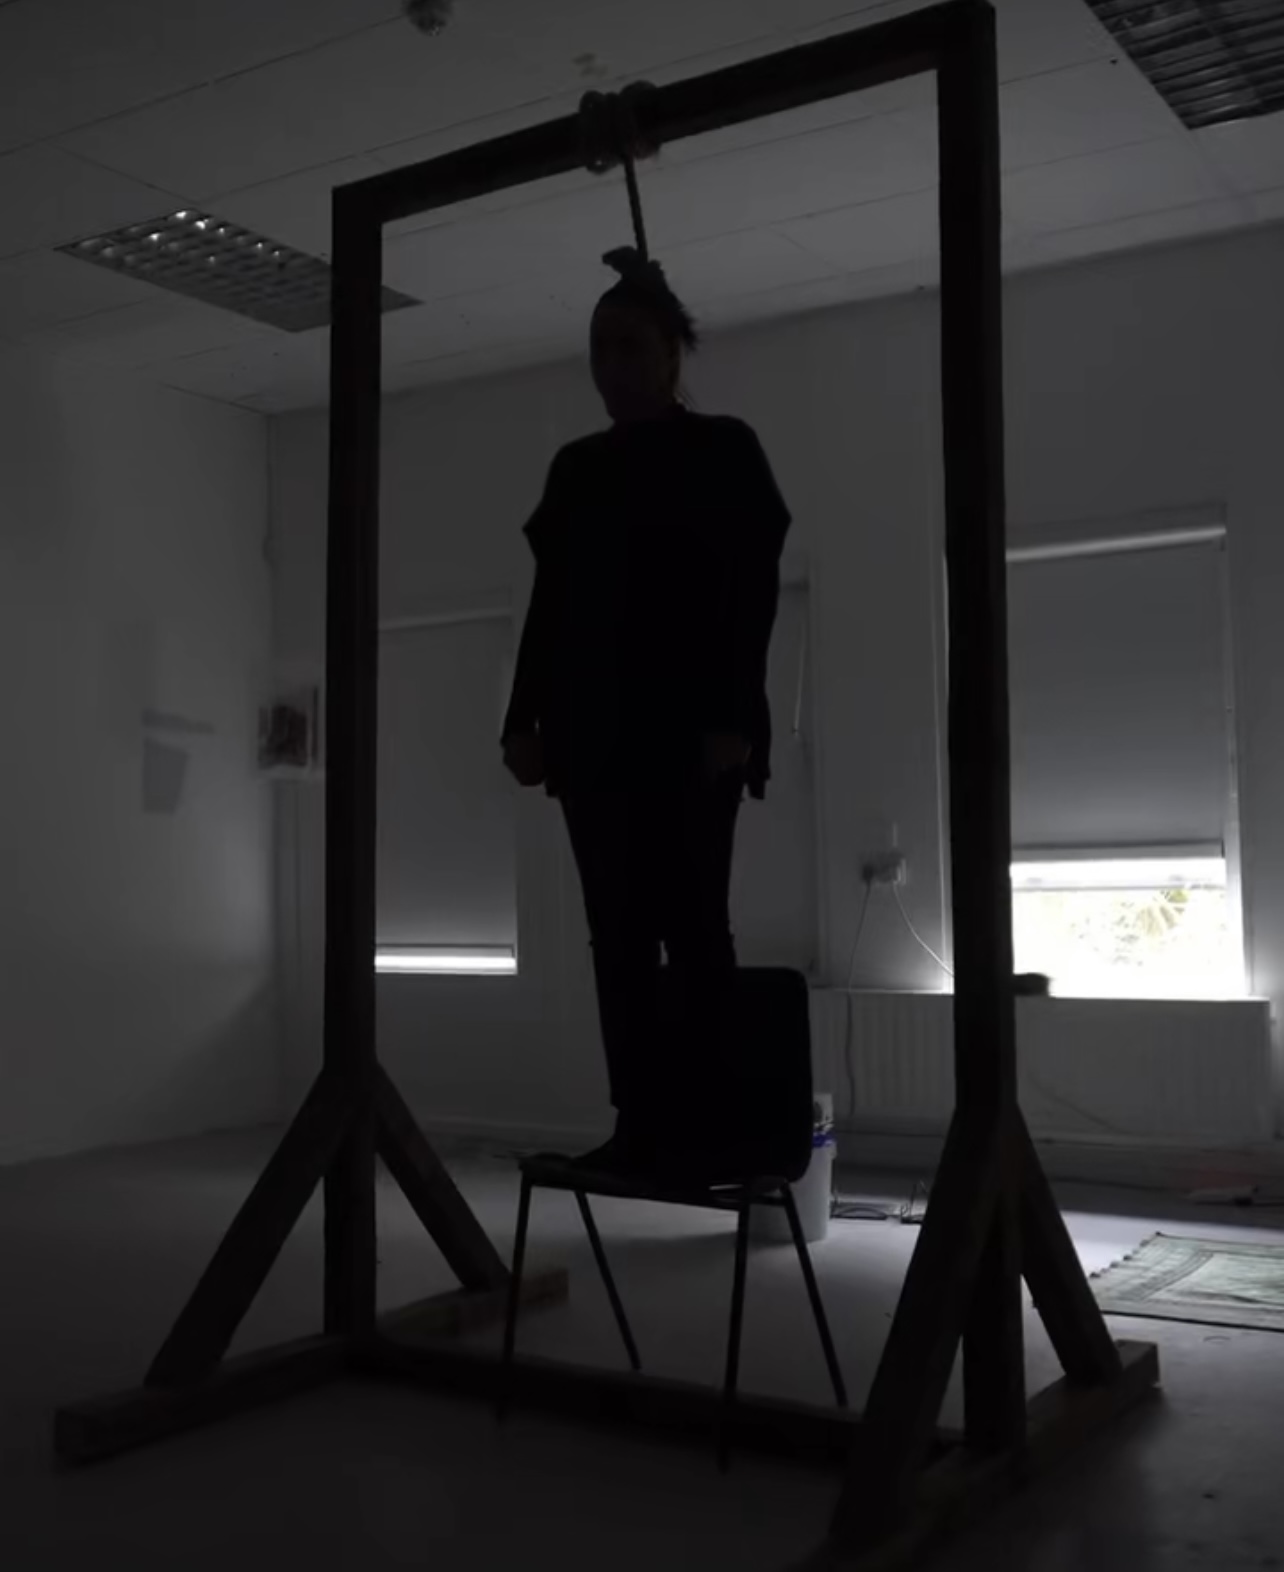 An image of a person stood on a chair with a noose around their neck.